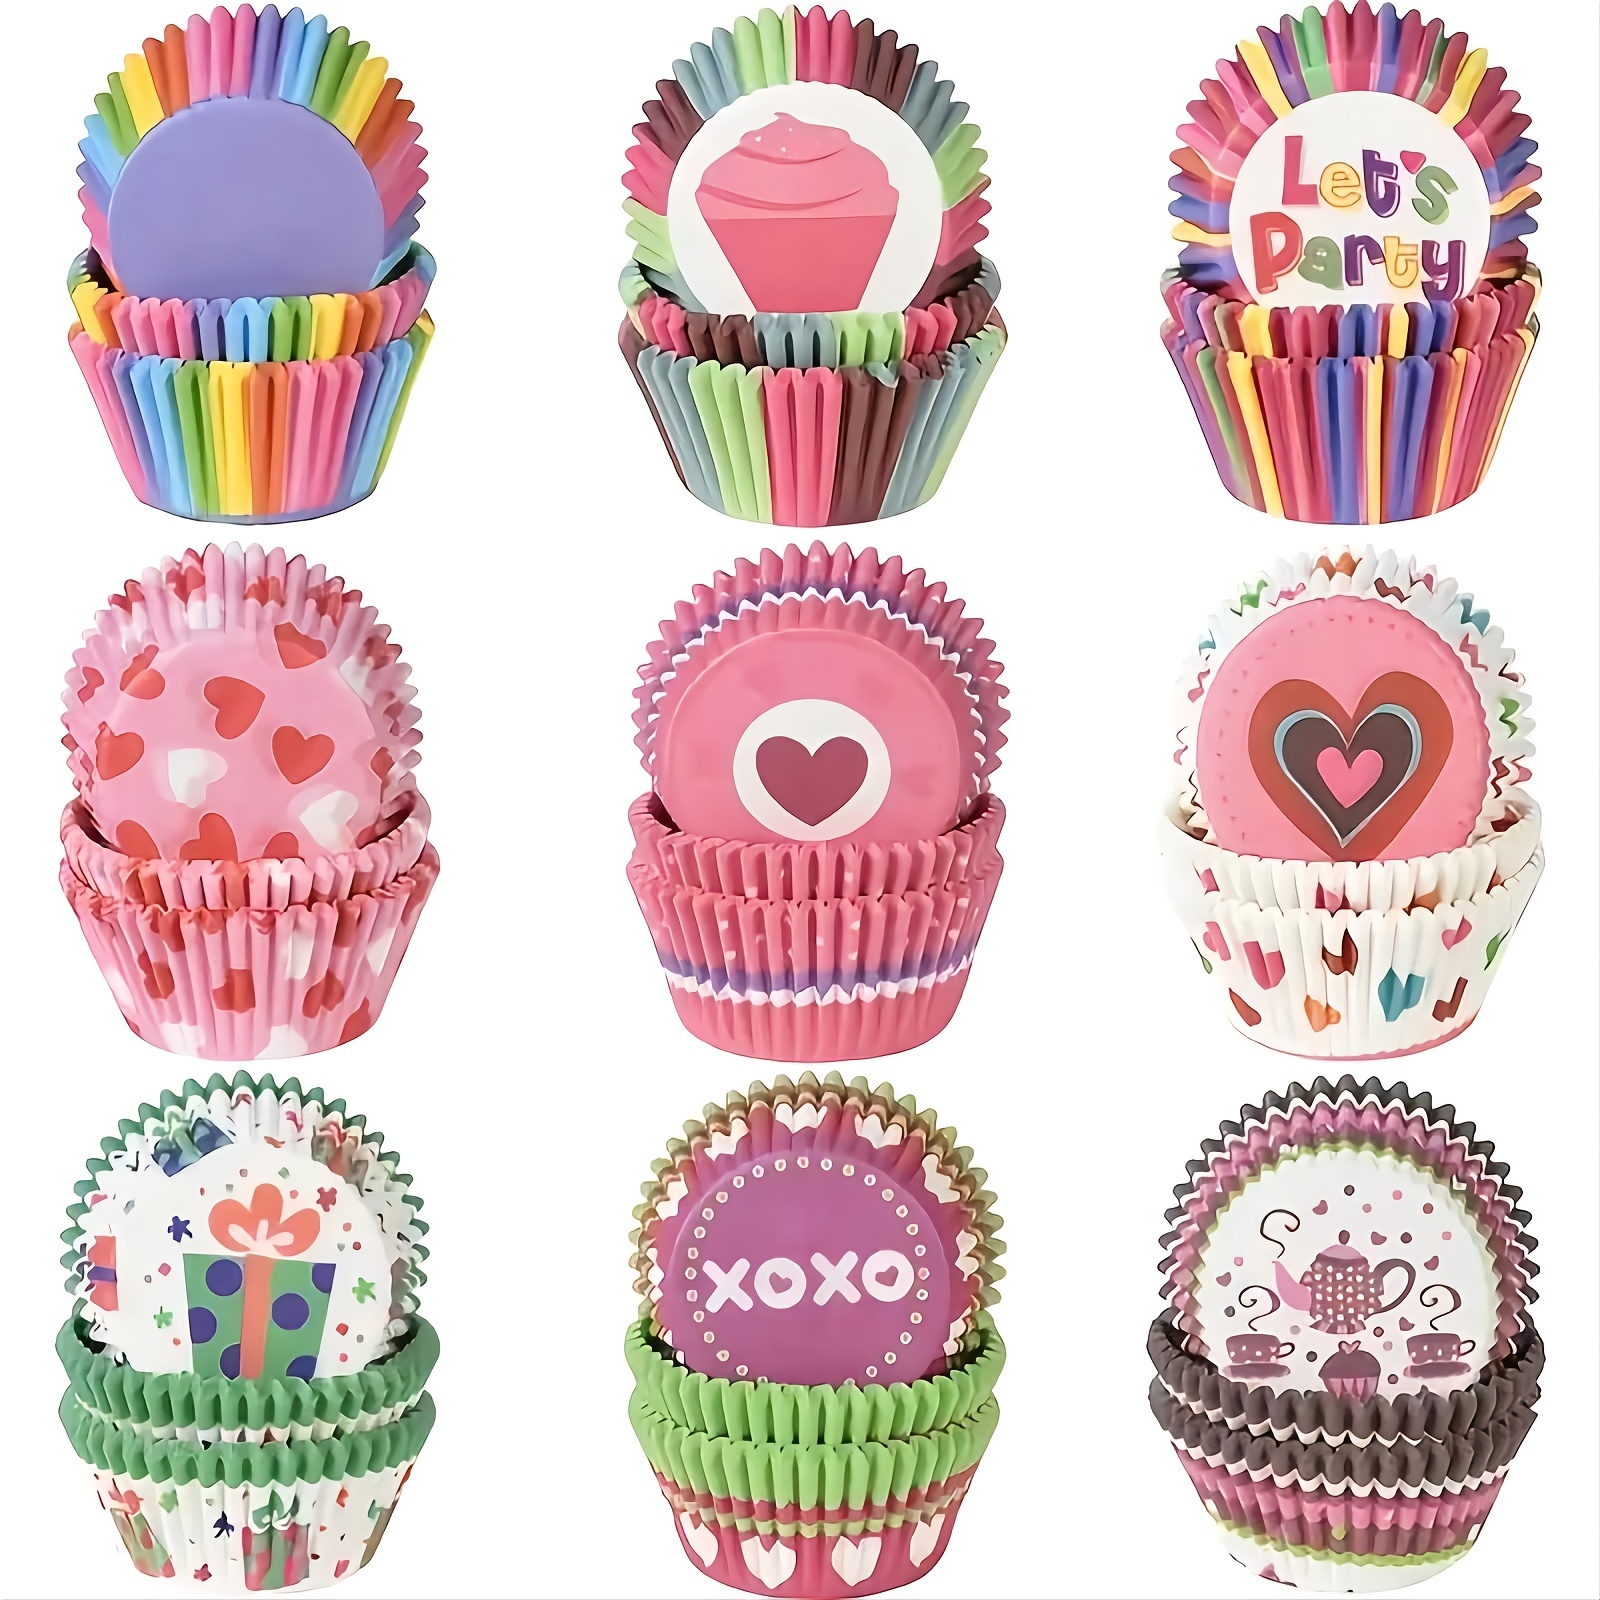 100 Piece Lets Party Cupcake Liners, Paper cupcake liner